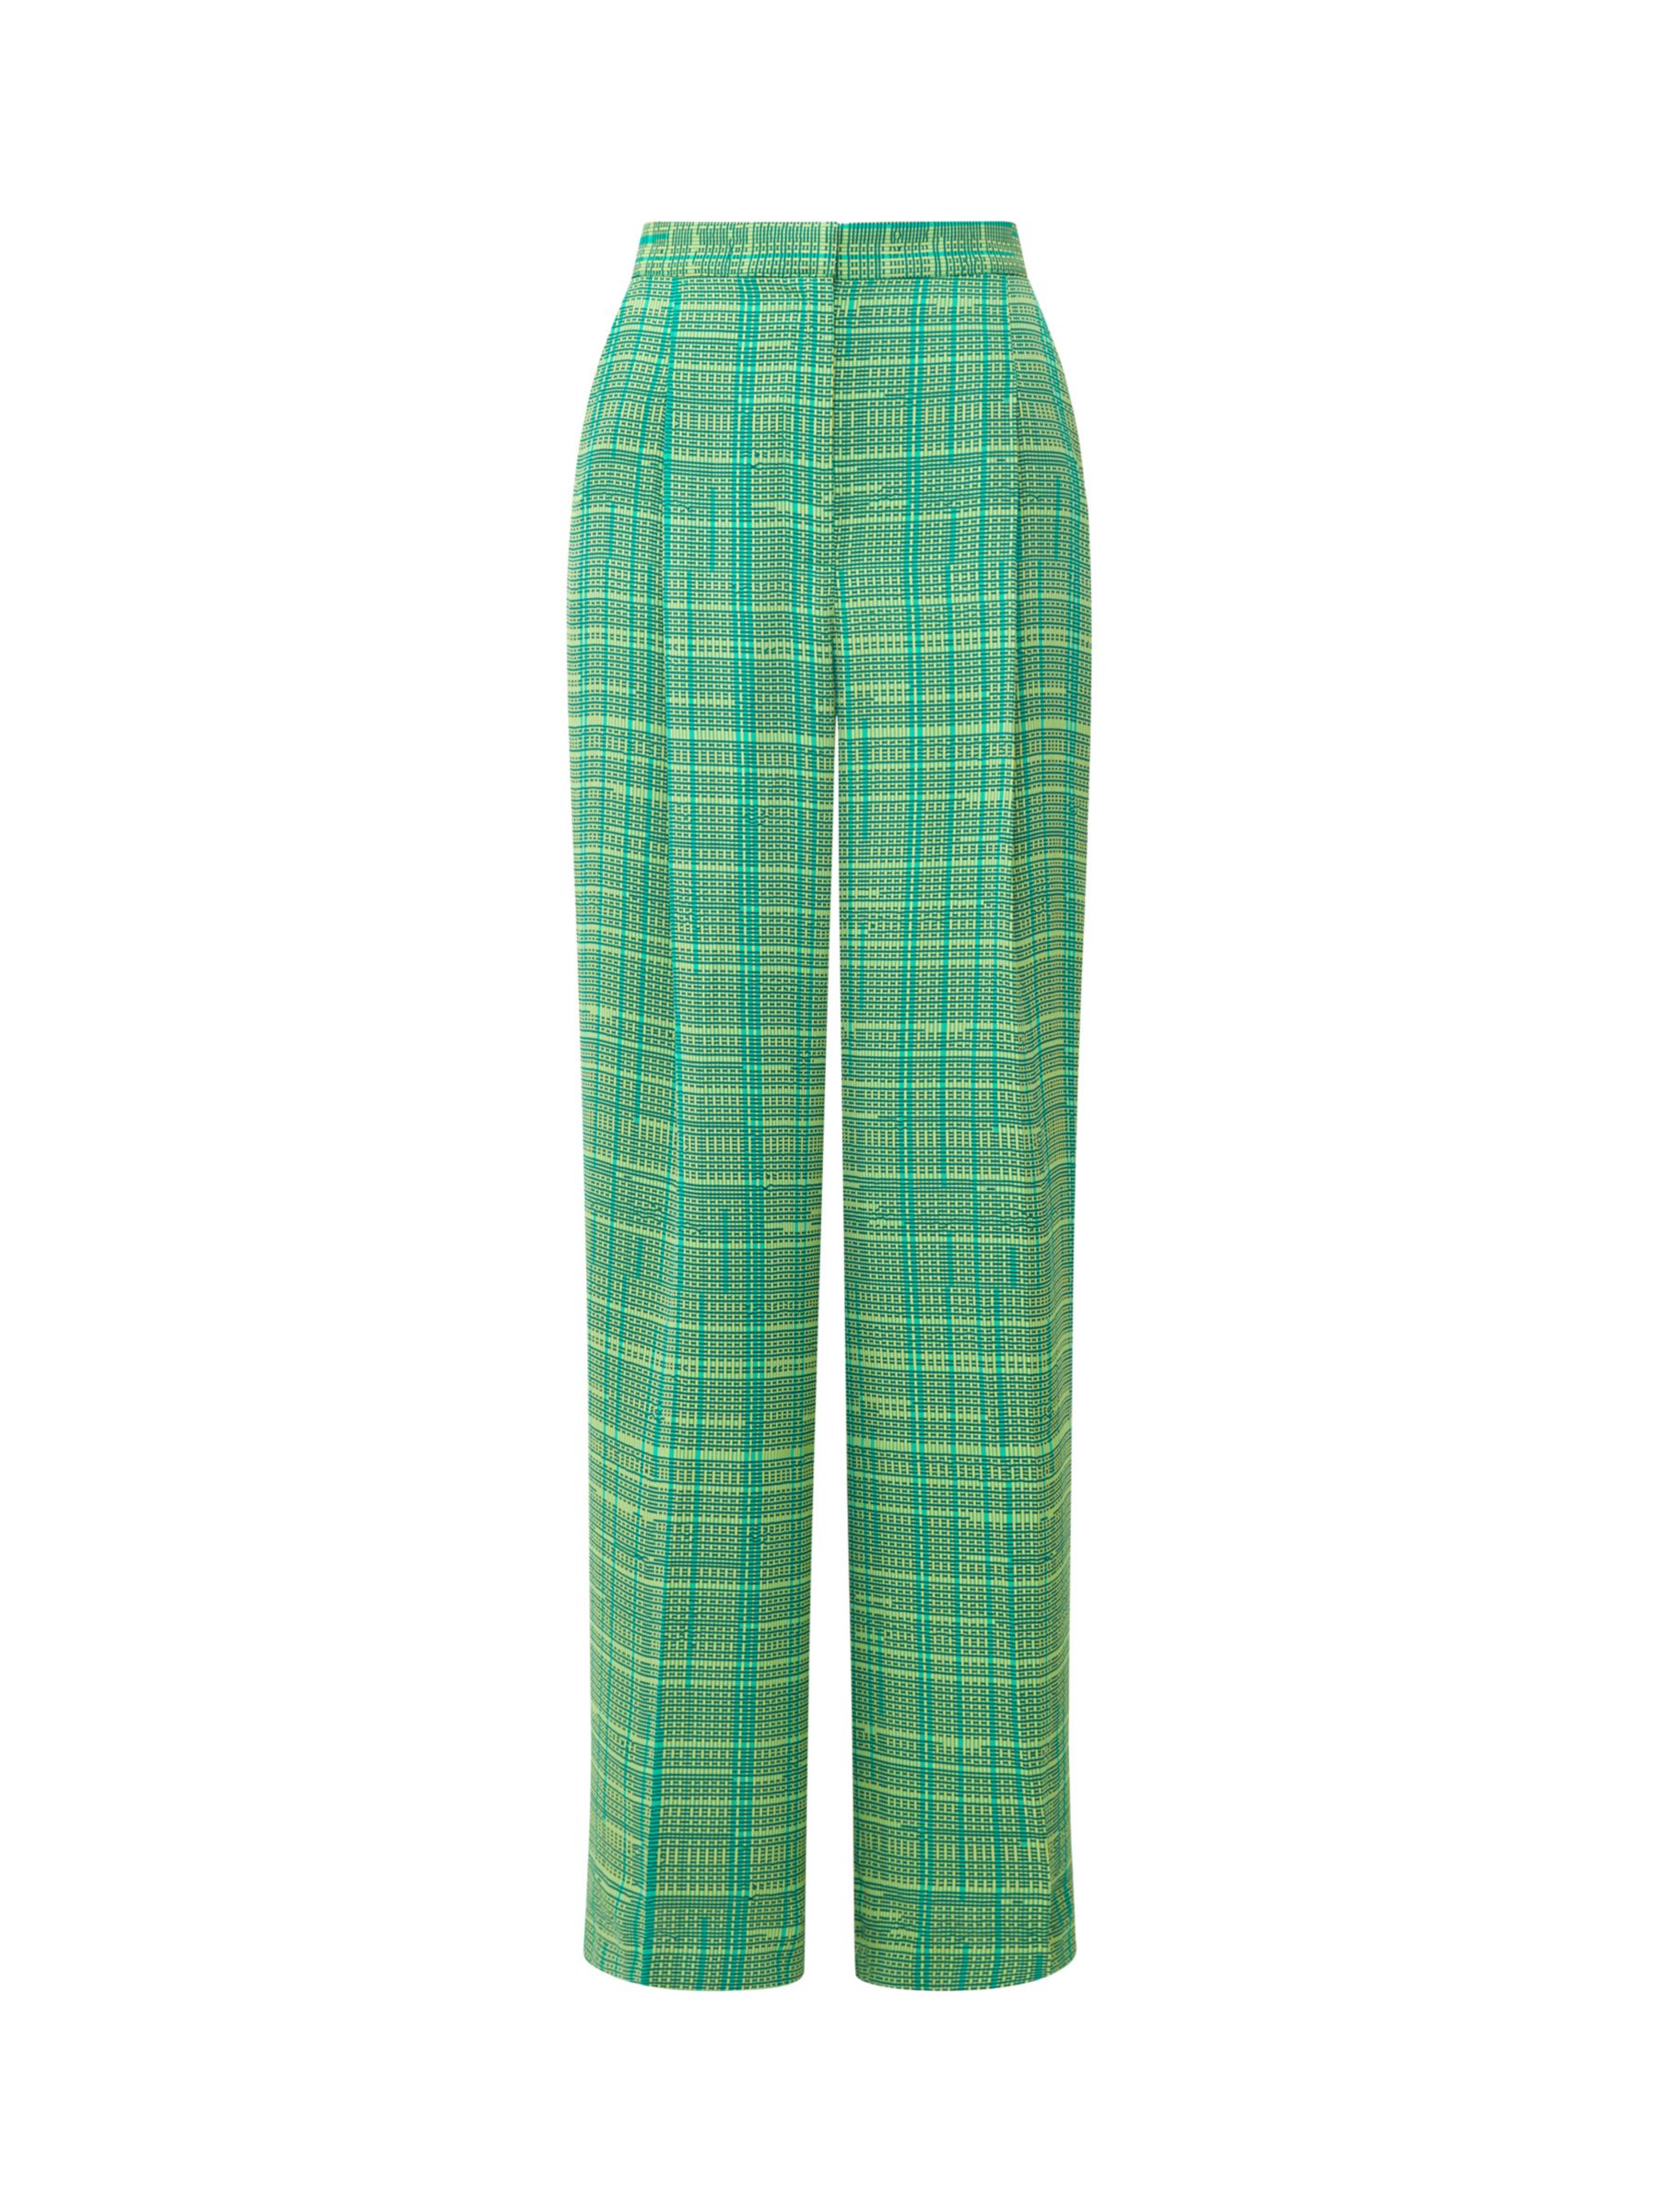 French Connection Carmen Crepe Trousers, Jelly Bean/Wasabi, 6